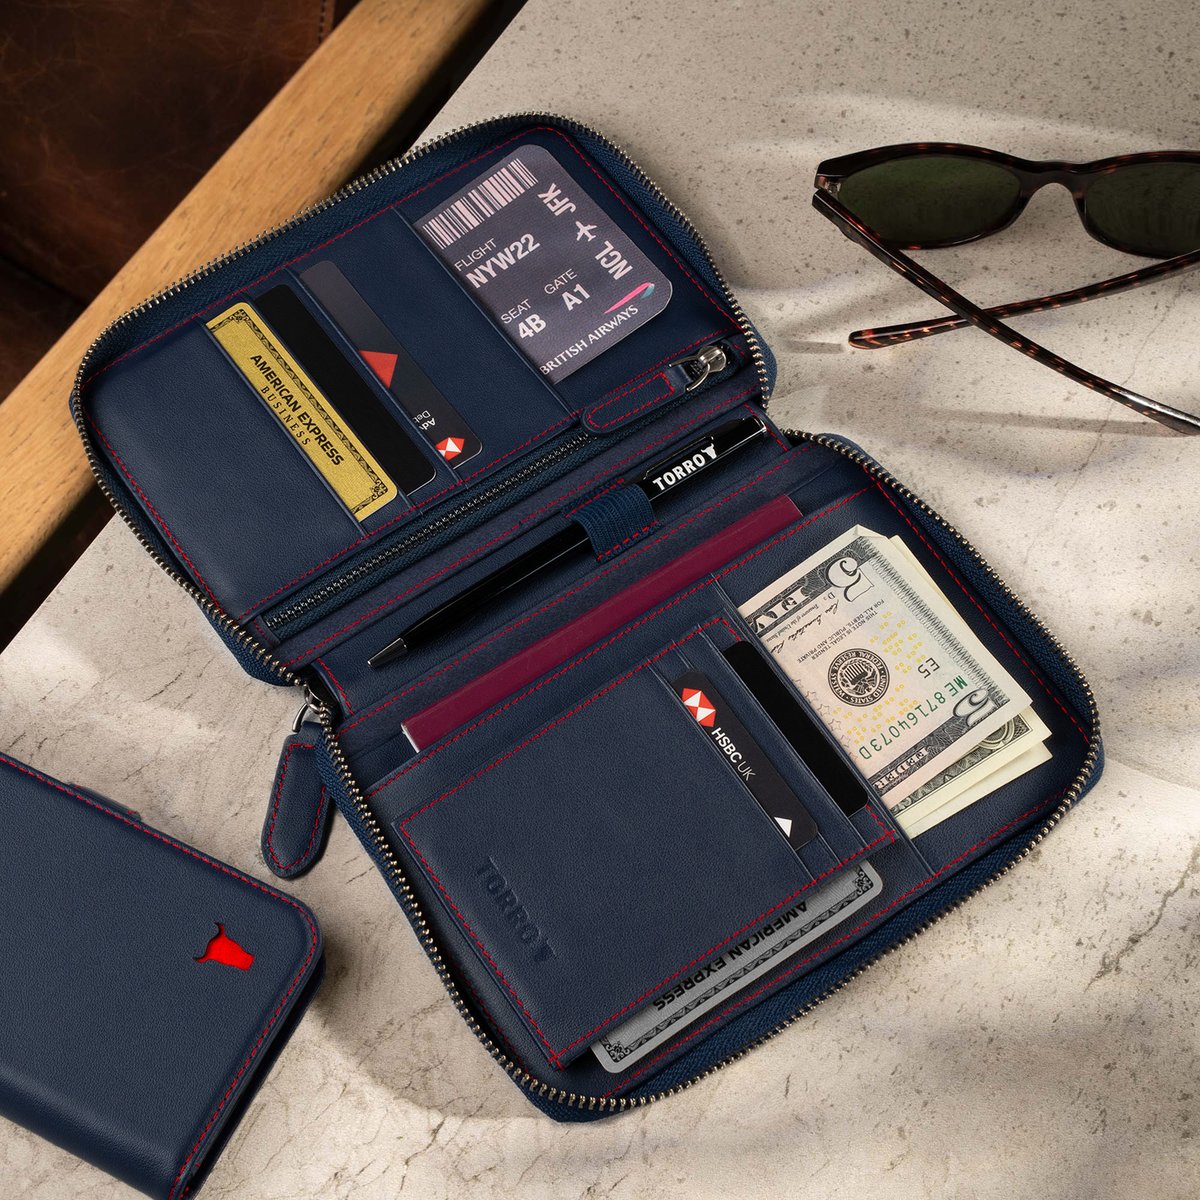 Leather Wallet, Coin Purse or Card Holder? – TORRO